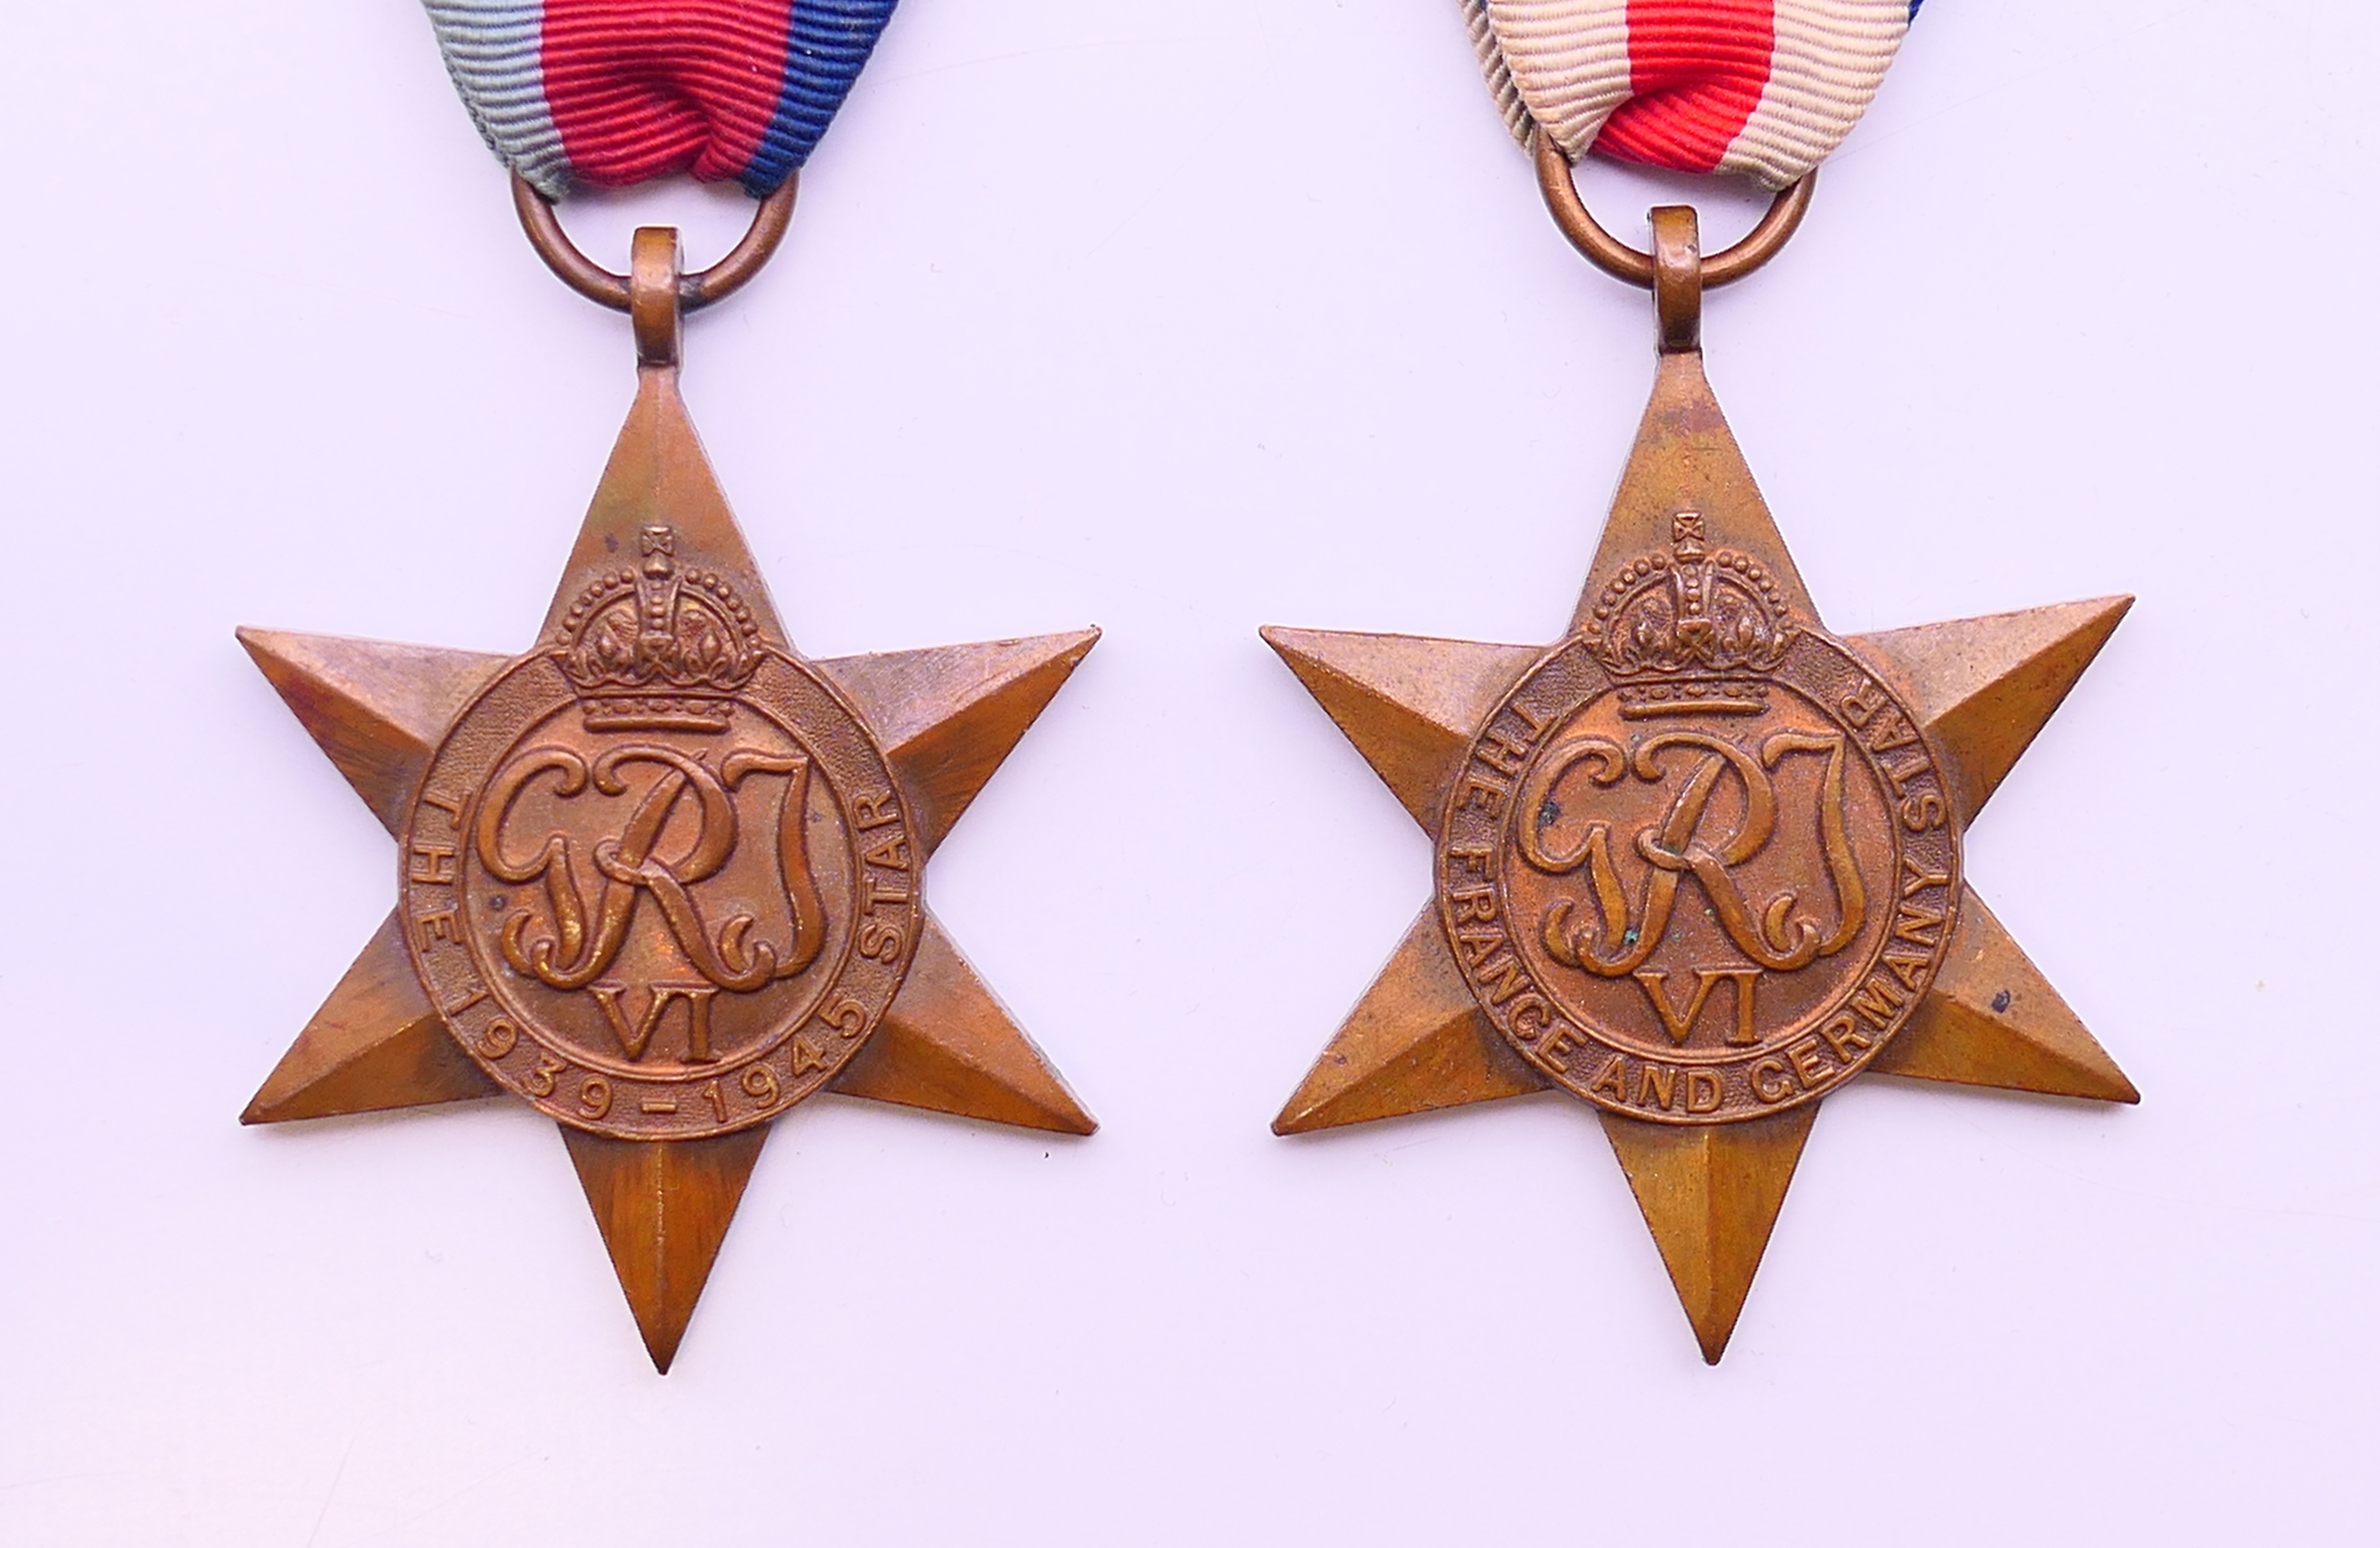 Two George IV medals (1939-45 Star and The France and Germany Star), - Image 4 of 9